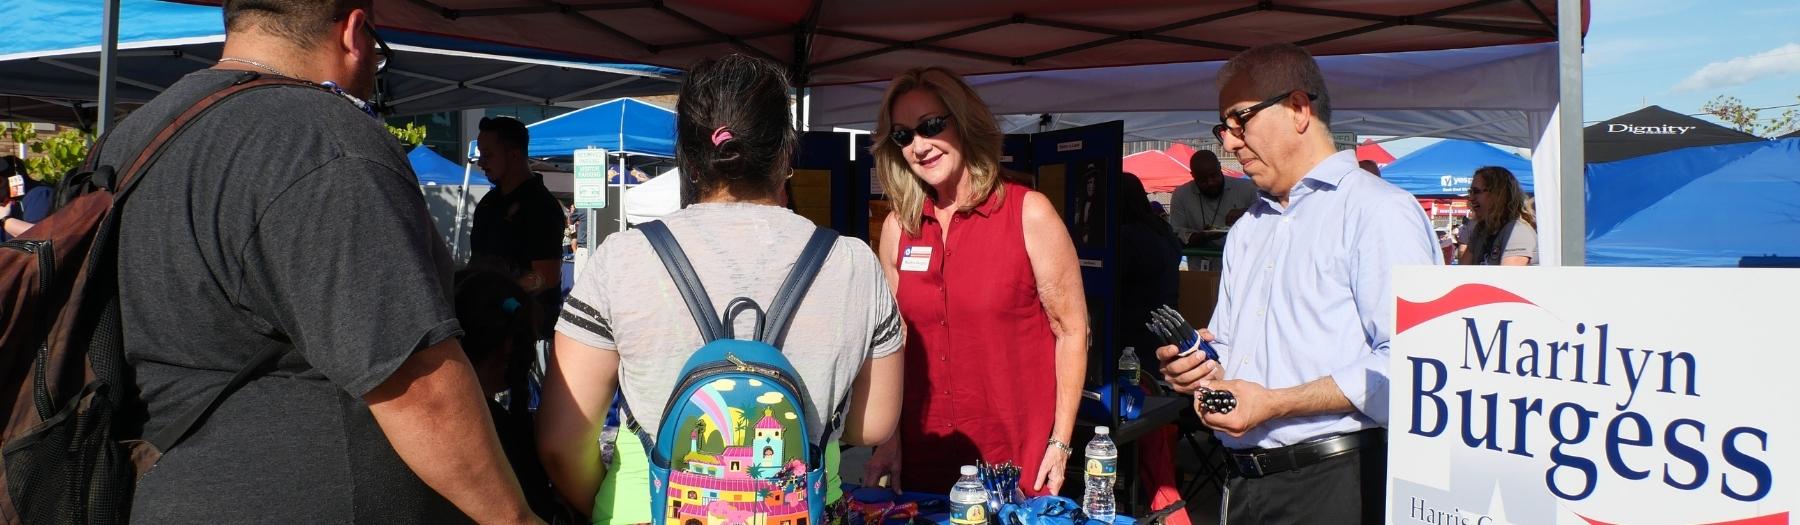 image showing the summer of 2022, District Clerk Marilyn Burgess participated in a community outreach event organized by Harris County Precinct 6 Constable Silvia Trevino